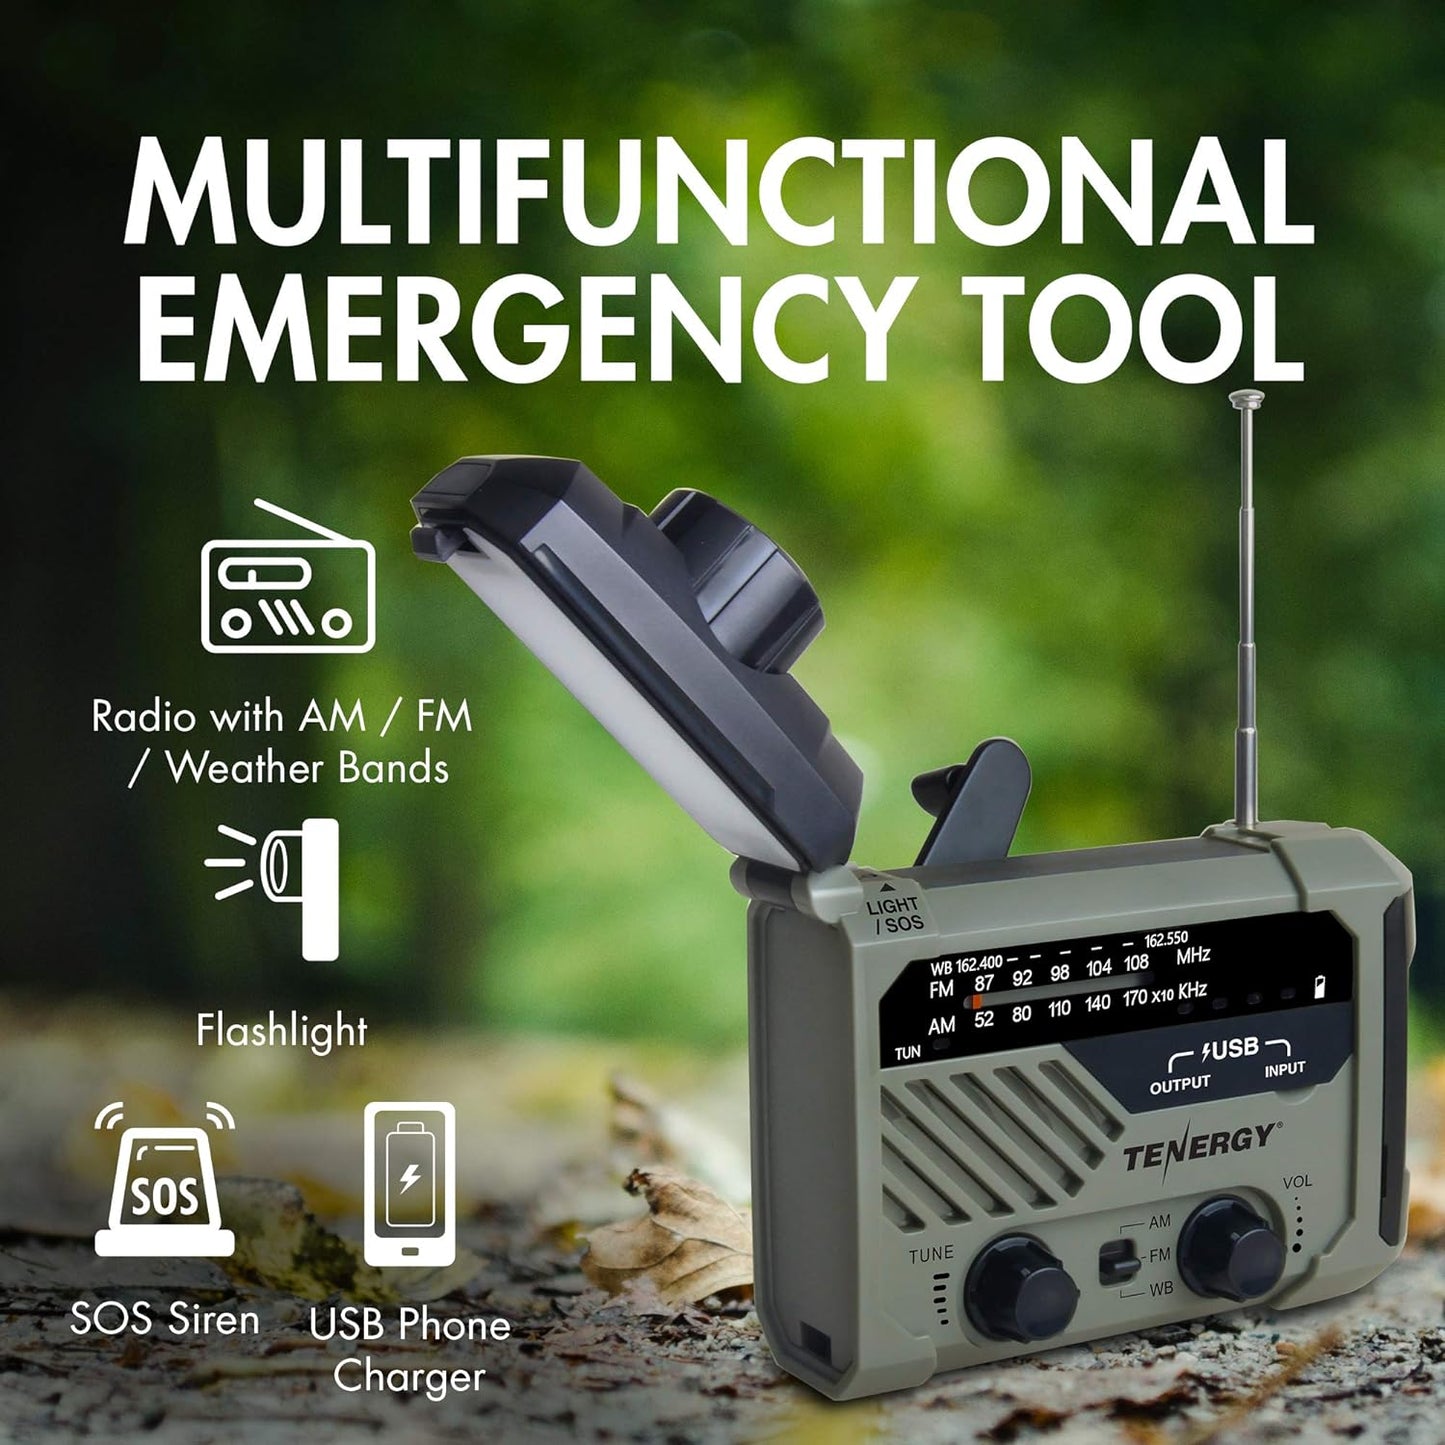 Multifunctional Hand Crank Weather Radio with LED Flashlights, SOS Alarm, Cell Phone Charger, AM/FM/NOAA Radio Frequencies, Ideal for Emergencies